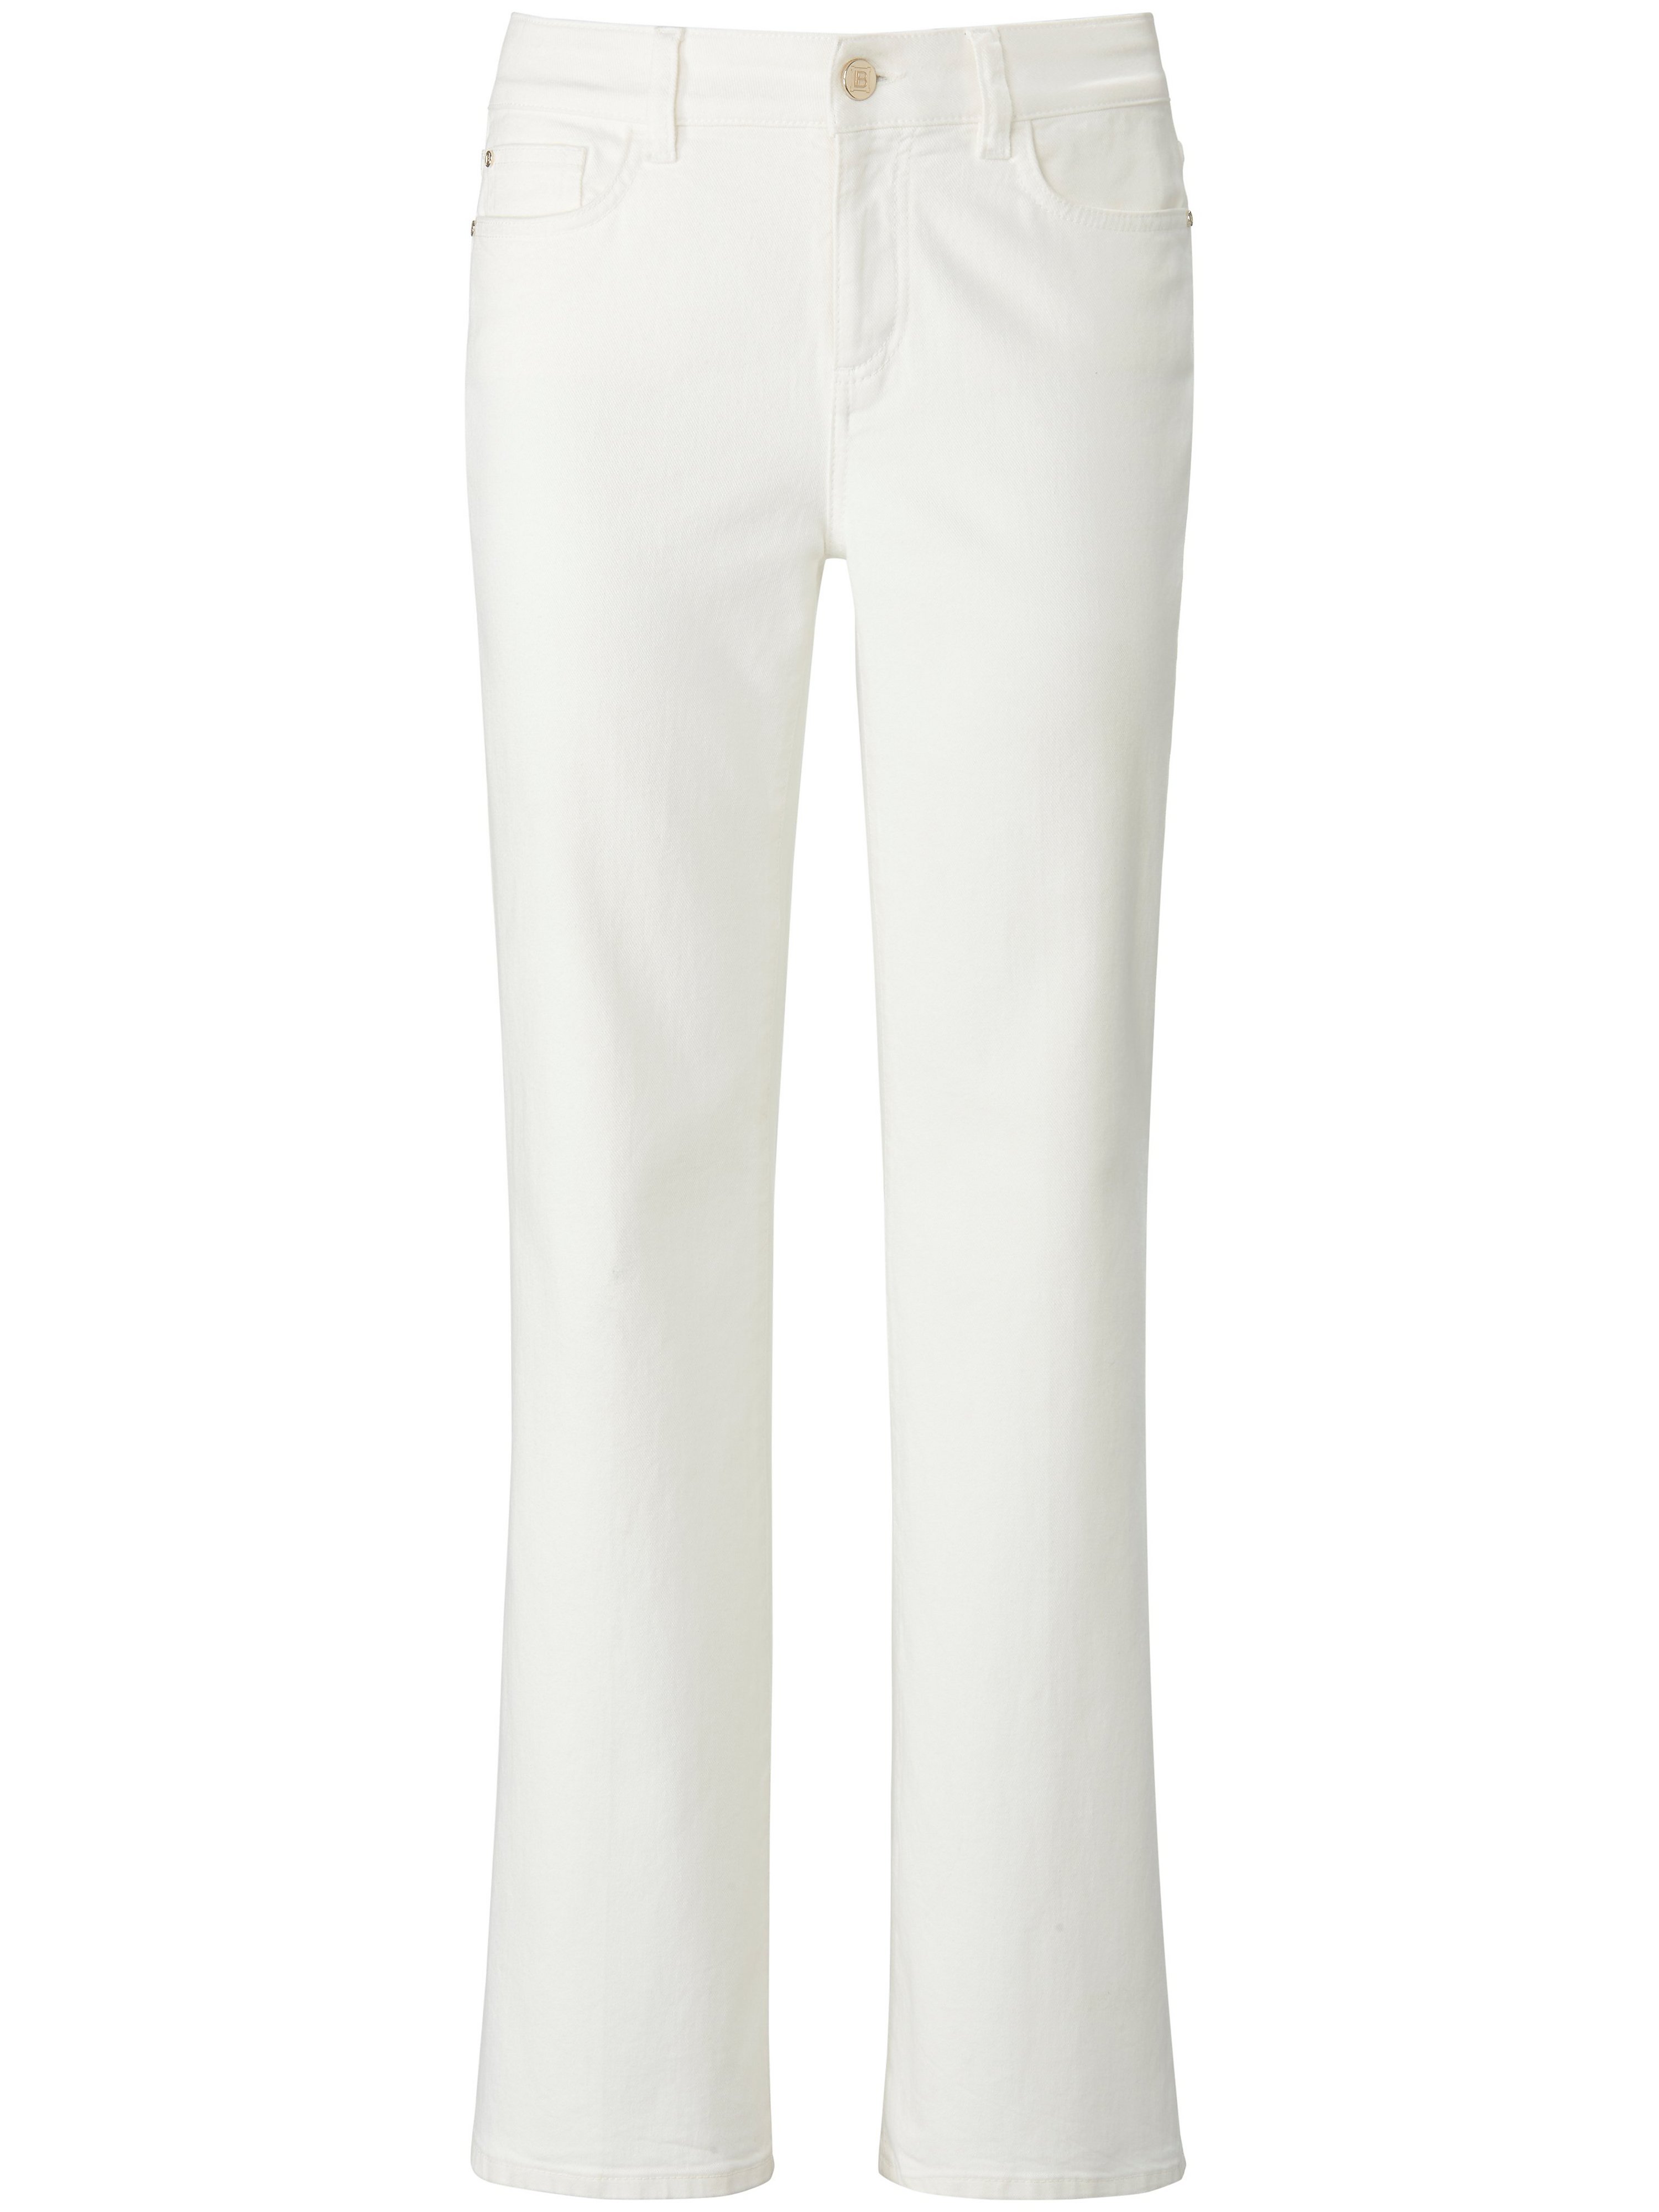 Le jean bootcut coupe 5 poches  Laura Biagiotti ROMA blanc taille 38